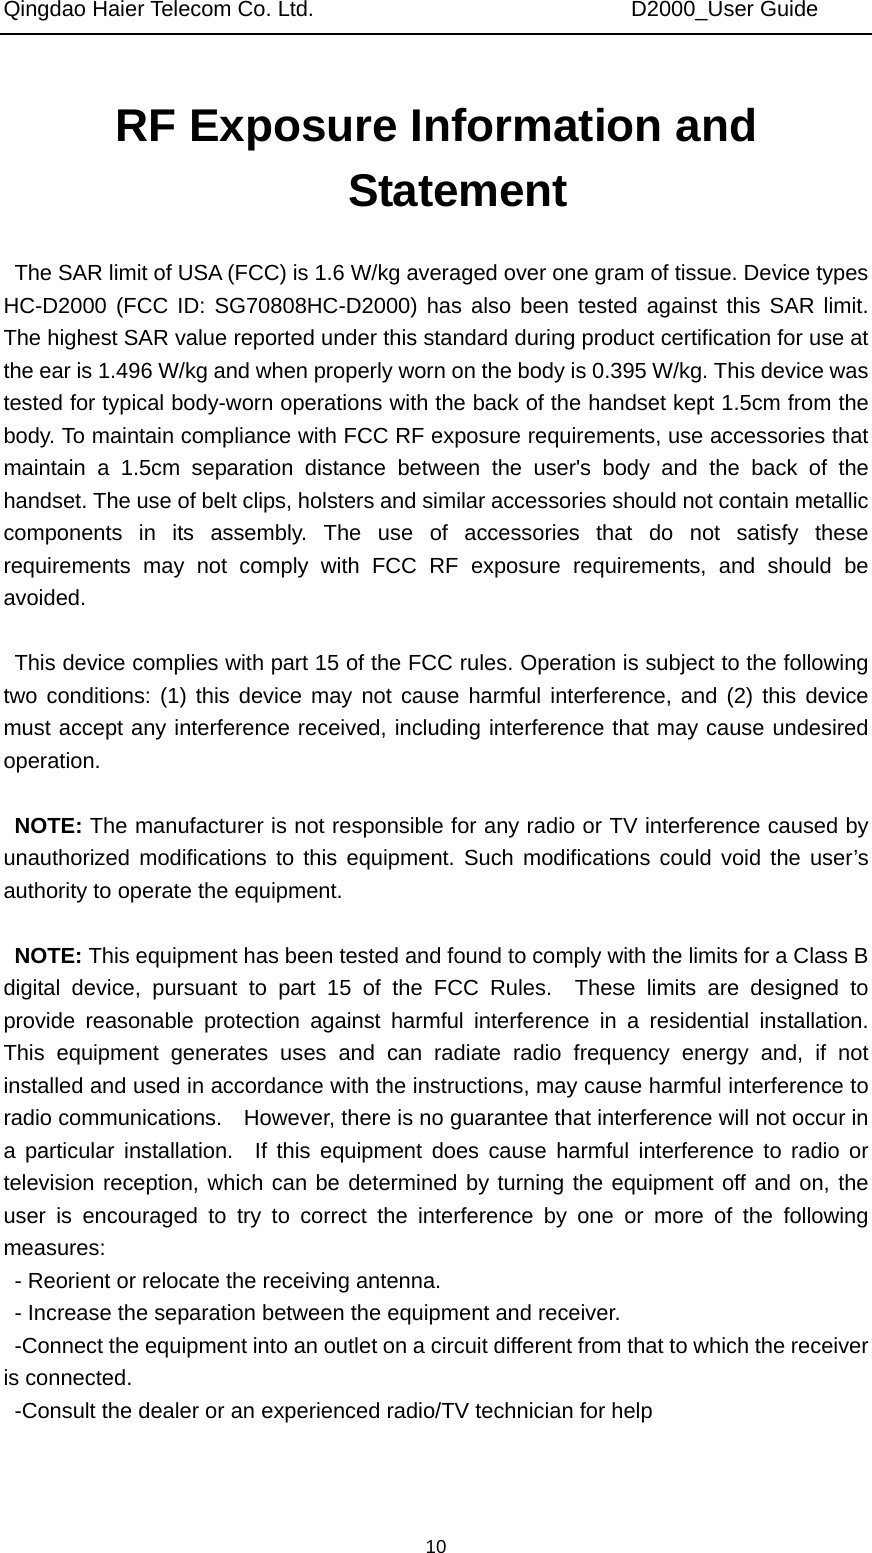 Qingdao Haier Telecom Co. Ltd.                             D2000_User Guide  10RF Exposure Information and Statement  The SAR limit of USA (FCC) is 1.6 W/kg averaged over one gram of tissue. Device types HC-D2000 (FCC ID: SG70808HC-D2000) has also been tested against this SAR limit. The highest SAR value reported under this standard during product certification for use at the ear is 1.496 W/kg and when properly worn on the body is 0.395 W/kg. This device was tested for typical body-worn operations with the back of the handset kept 1.5cm from the body. To maintain compliance with FCC RF exposure requirements, use accessories that maintain a 1.5cm separation distance between the user&apos;s body and the back of the handset. The use of belt clips, holsters and similar accessories should not contain metallic components in its assembly. The use of accessories that do not satisfy these requirements may not comply with FCC RF exposure requirements, and should be avoided.  This device complies with part 15 of the FCC rules. Operation is subject to the following two conditions: (1) this device may not cause harmful interference, and (2) this device must accept any interference received, including interference that may cause undesired operation.  NOTE: The manufacturer is not responsible for any radio or TV interference caused by unauthorized modifications to this equipment. Such modifications could void the user’s authority to operate the equipment.  NOTE: This equipment has been tested and found to comply with the limits for a Class B digital device, pursuant to part 15 of the FCC Rules.  These limits are designed to provide reasonable protection against harmful interference in a residential installation.  This equipment generates uses and can radiate radio frequency energy and, if not installed and used in accordance with the instructions, may cause harmful interference to radio communications.    However, there is no guarantee that interference will not occur in a particular installation.  If this equipment does cause harmful interference to radio or television reception, which can be determined by turning the equipment off and on, the user is encouraged to try to correct the interference by one or more of the following measures: - Reorient or relocate the receiving antenna. - Increase the separation between the equipment and receiver. -Connect the equipment into an outlet on a circuit different from that to which the receiver is connected. -Consult the dealer or an experienced radio/TV technician for help   